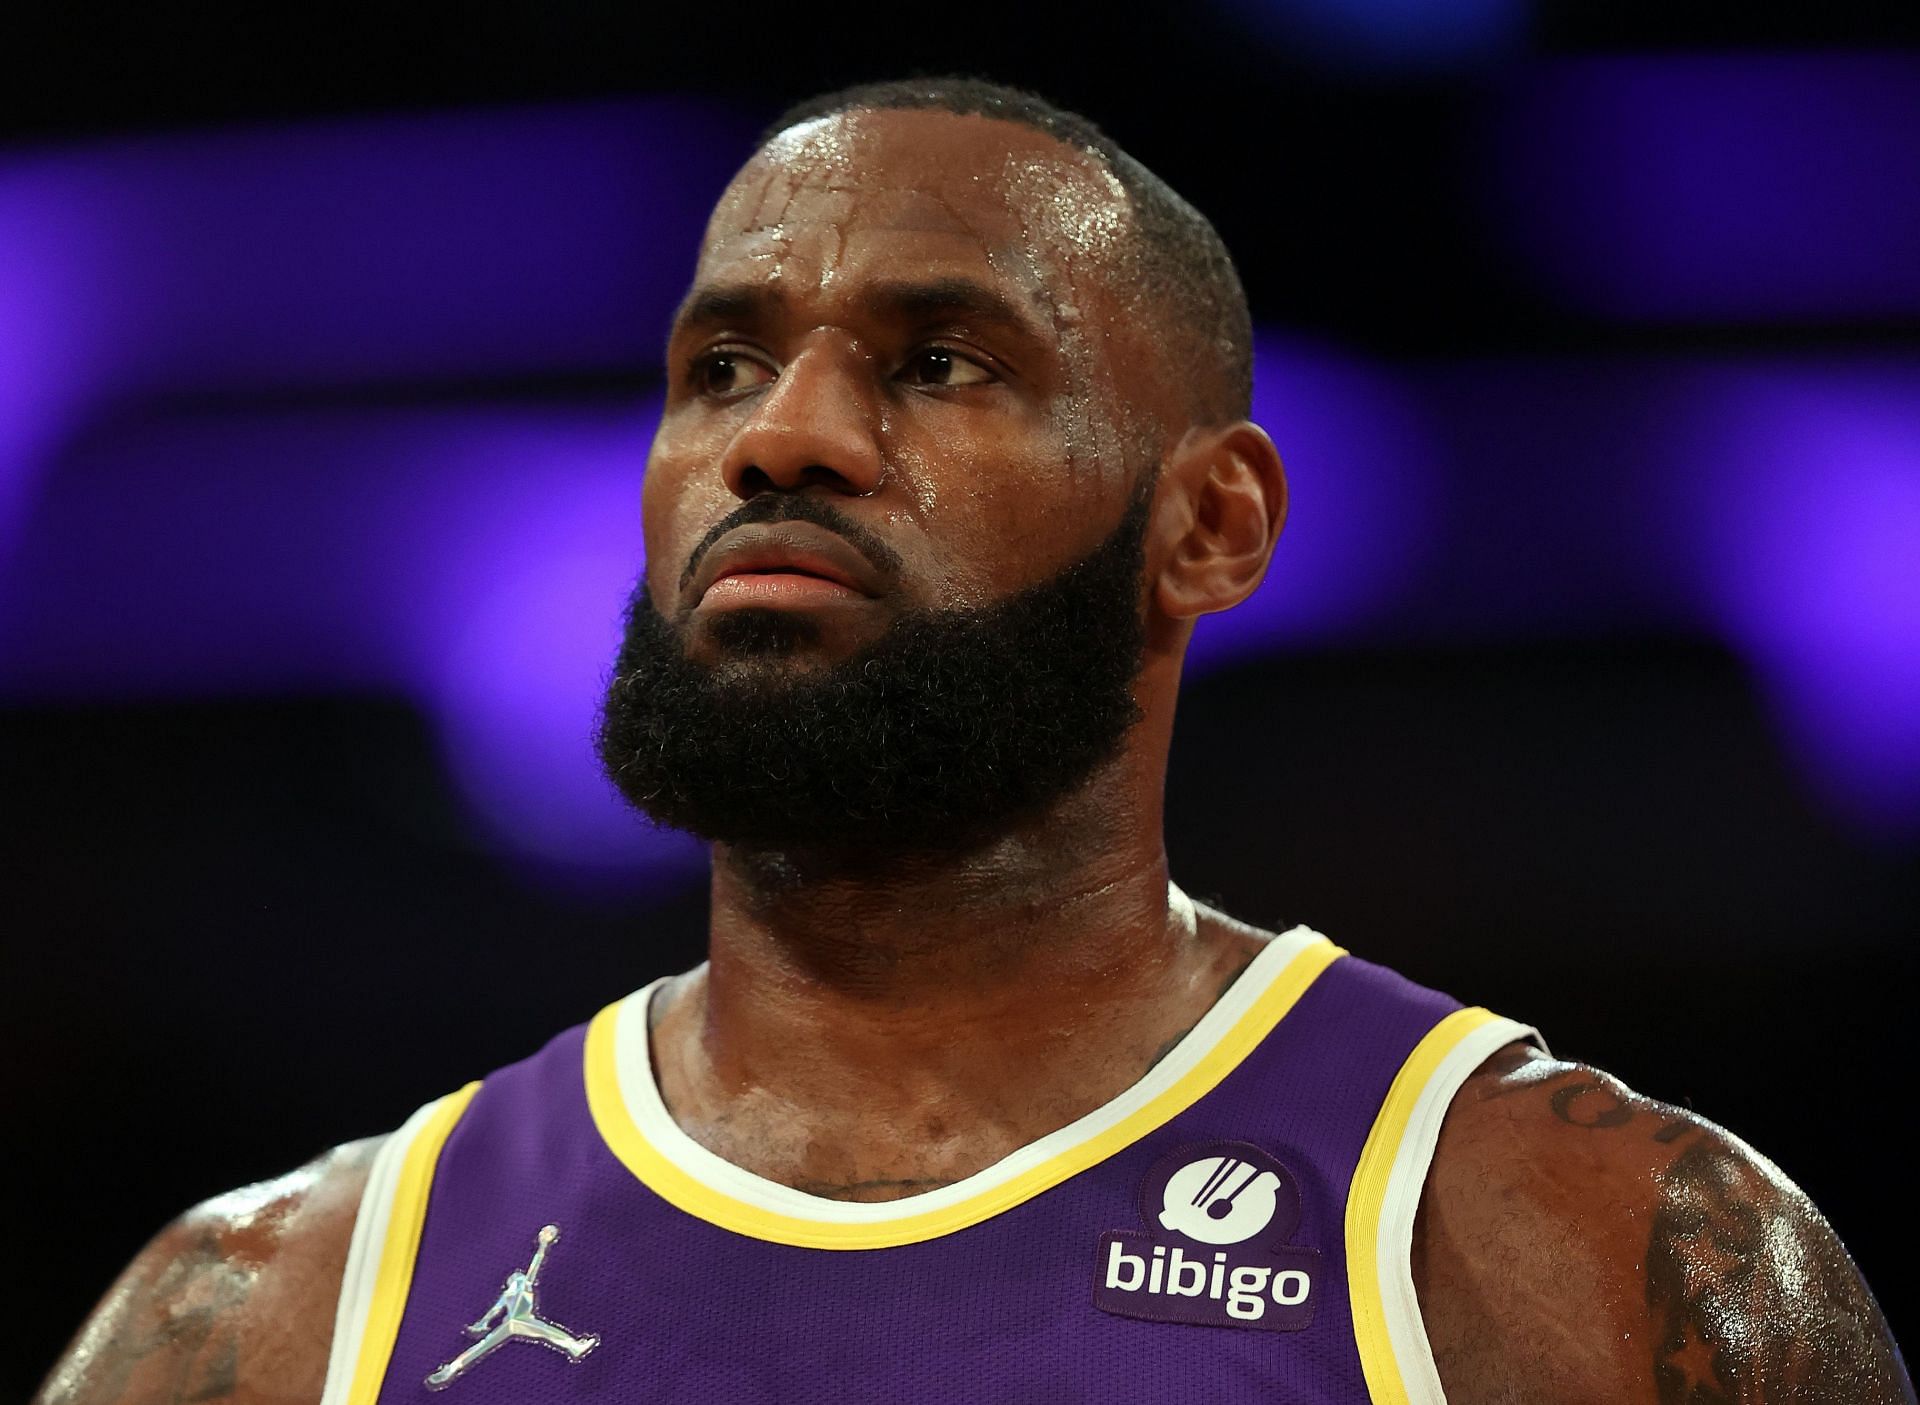 LeBron James came up with a power-papcked performance to lift the LA Lakers past the Houston Rocket.s